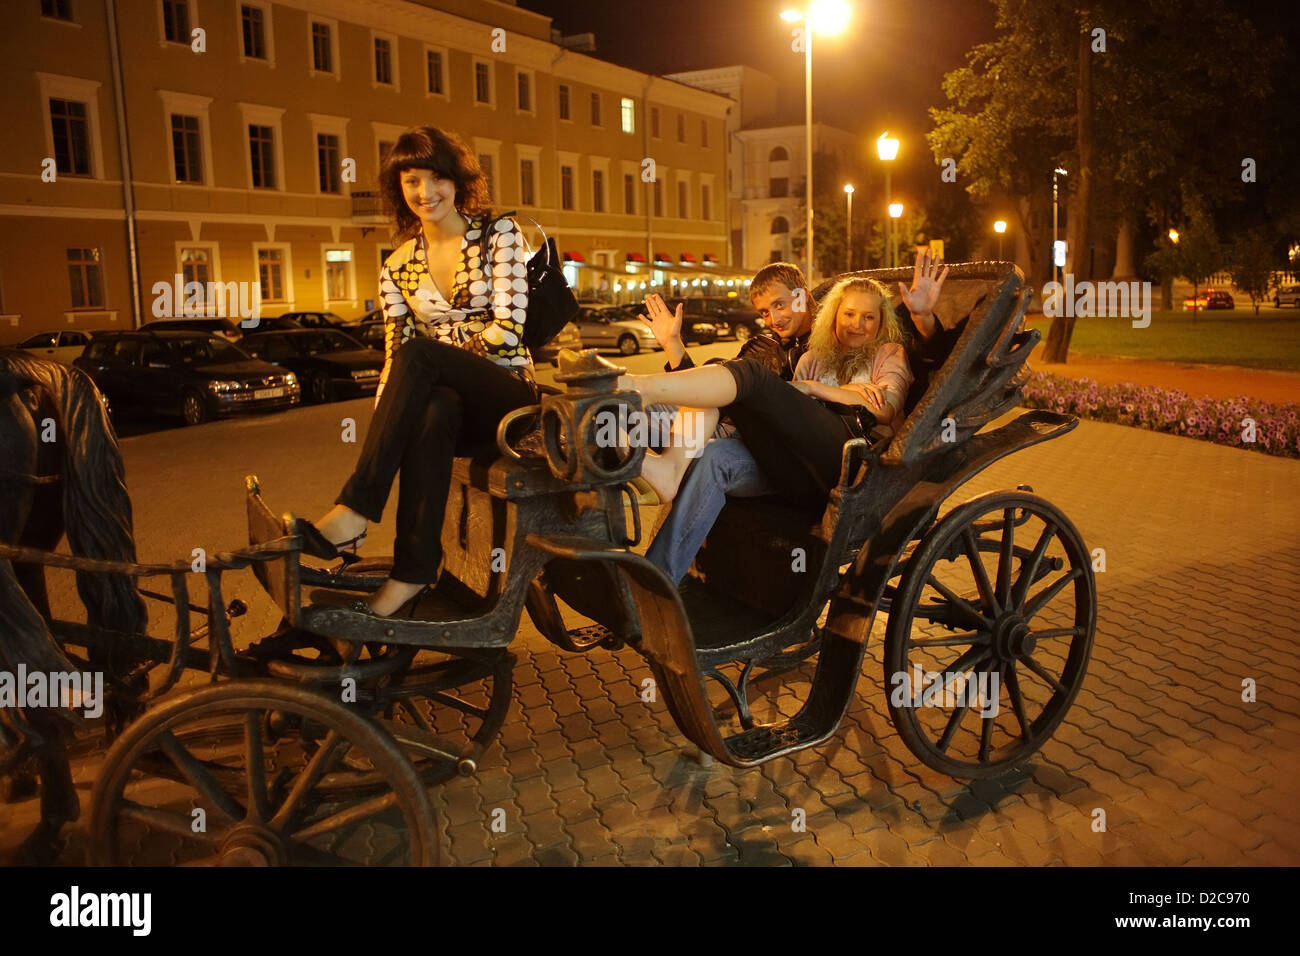 Minsk, Belarus, young people in an iron horse-drawn carriage in front of the town hall Stock Photo